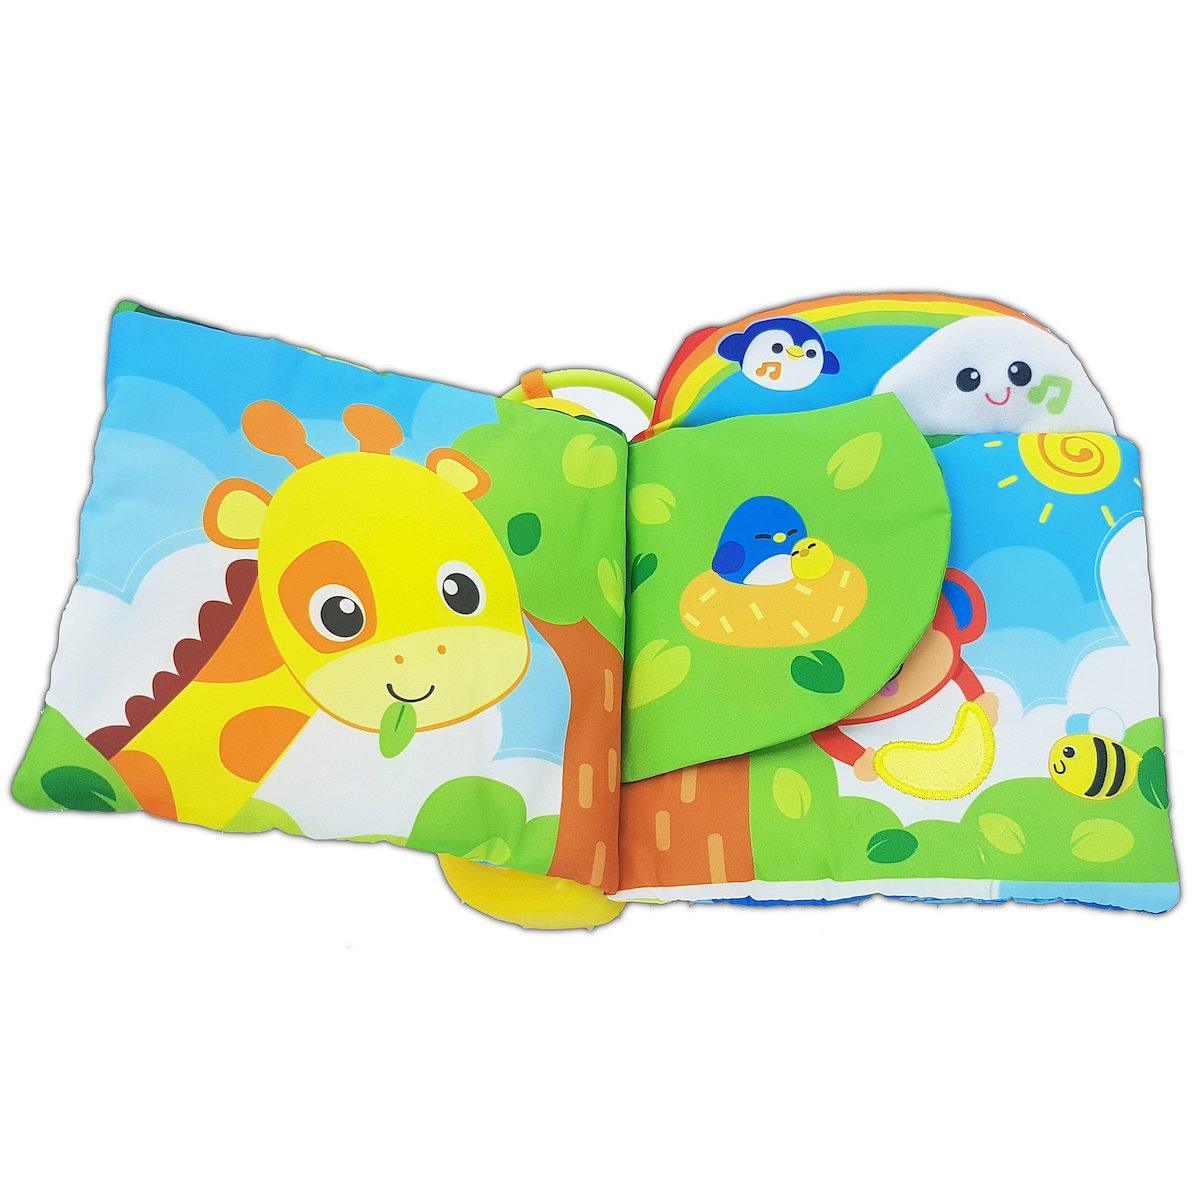 WinFun Jungle Pals Sensory Book - BumbleToys - 2-4 Years, Cecil, Learning Toys, Unisex